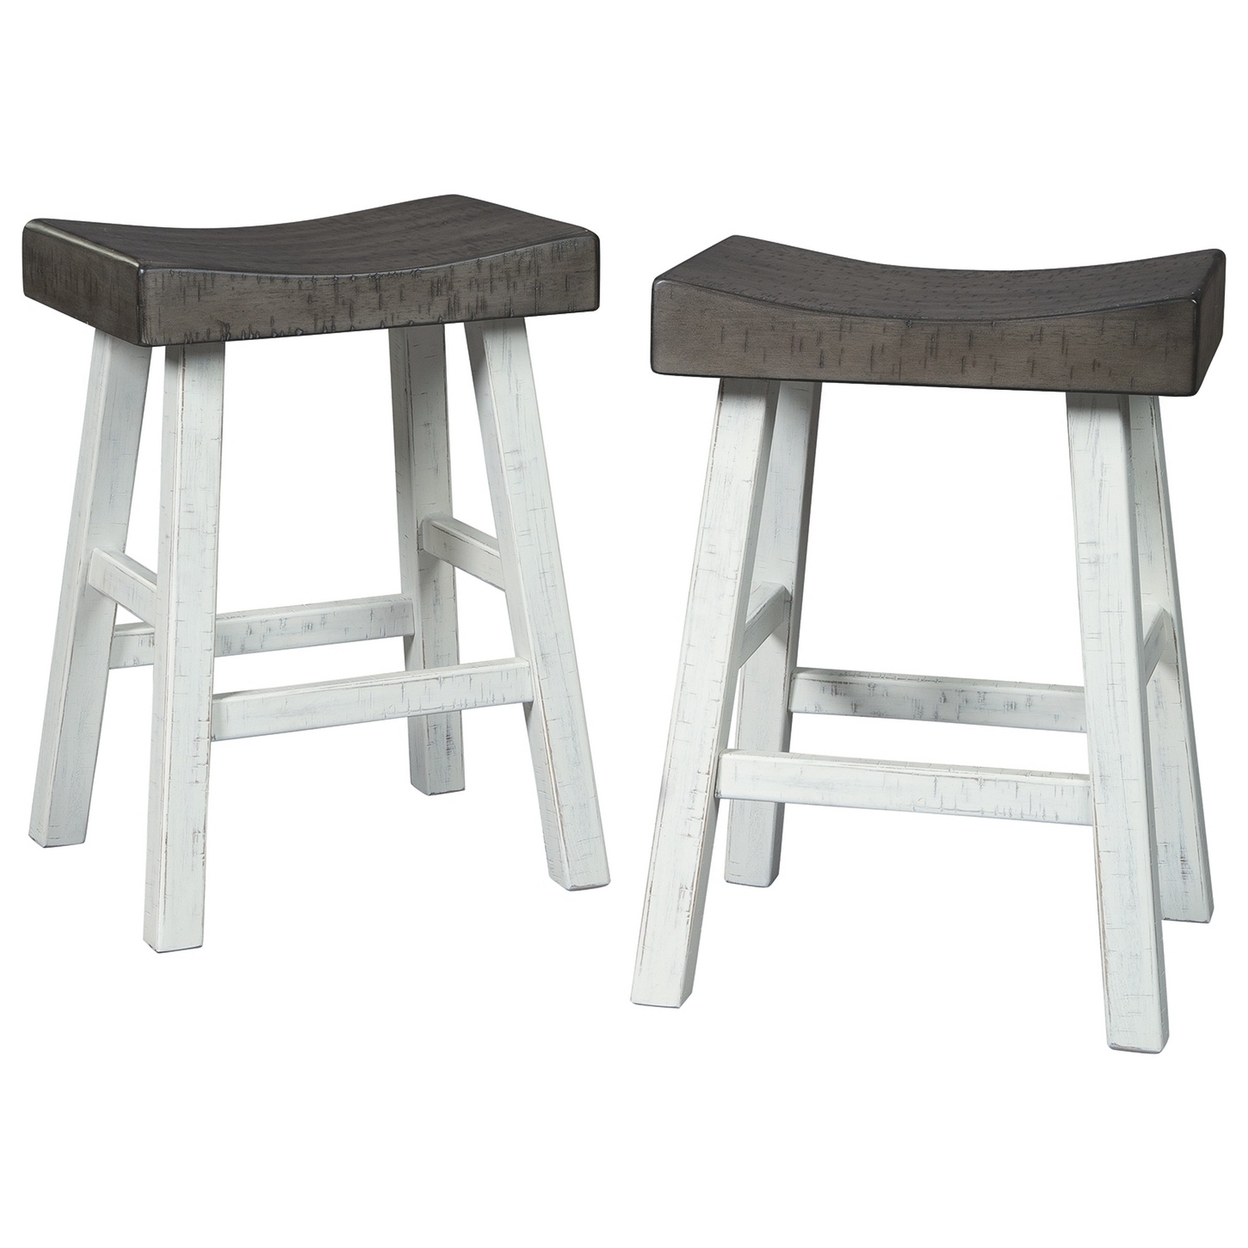 25 Inch Wooden Saddle Stool With Angular Legs, Set Of 2, Brown And White- Saltoro Sherpi